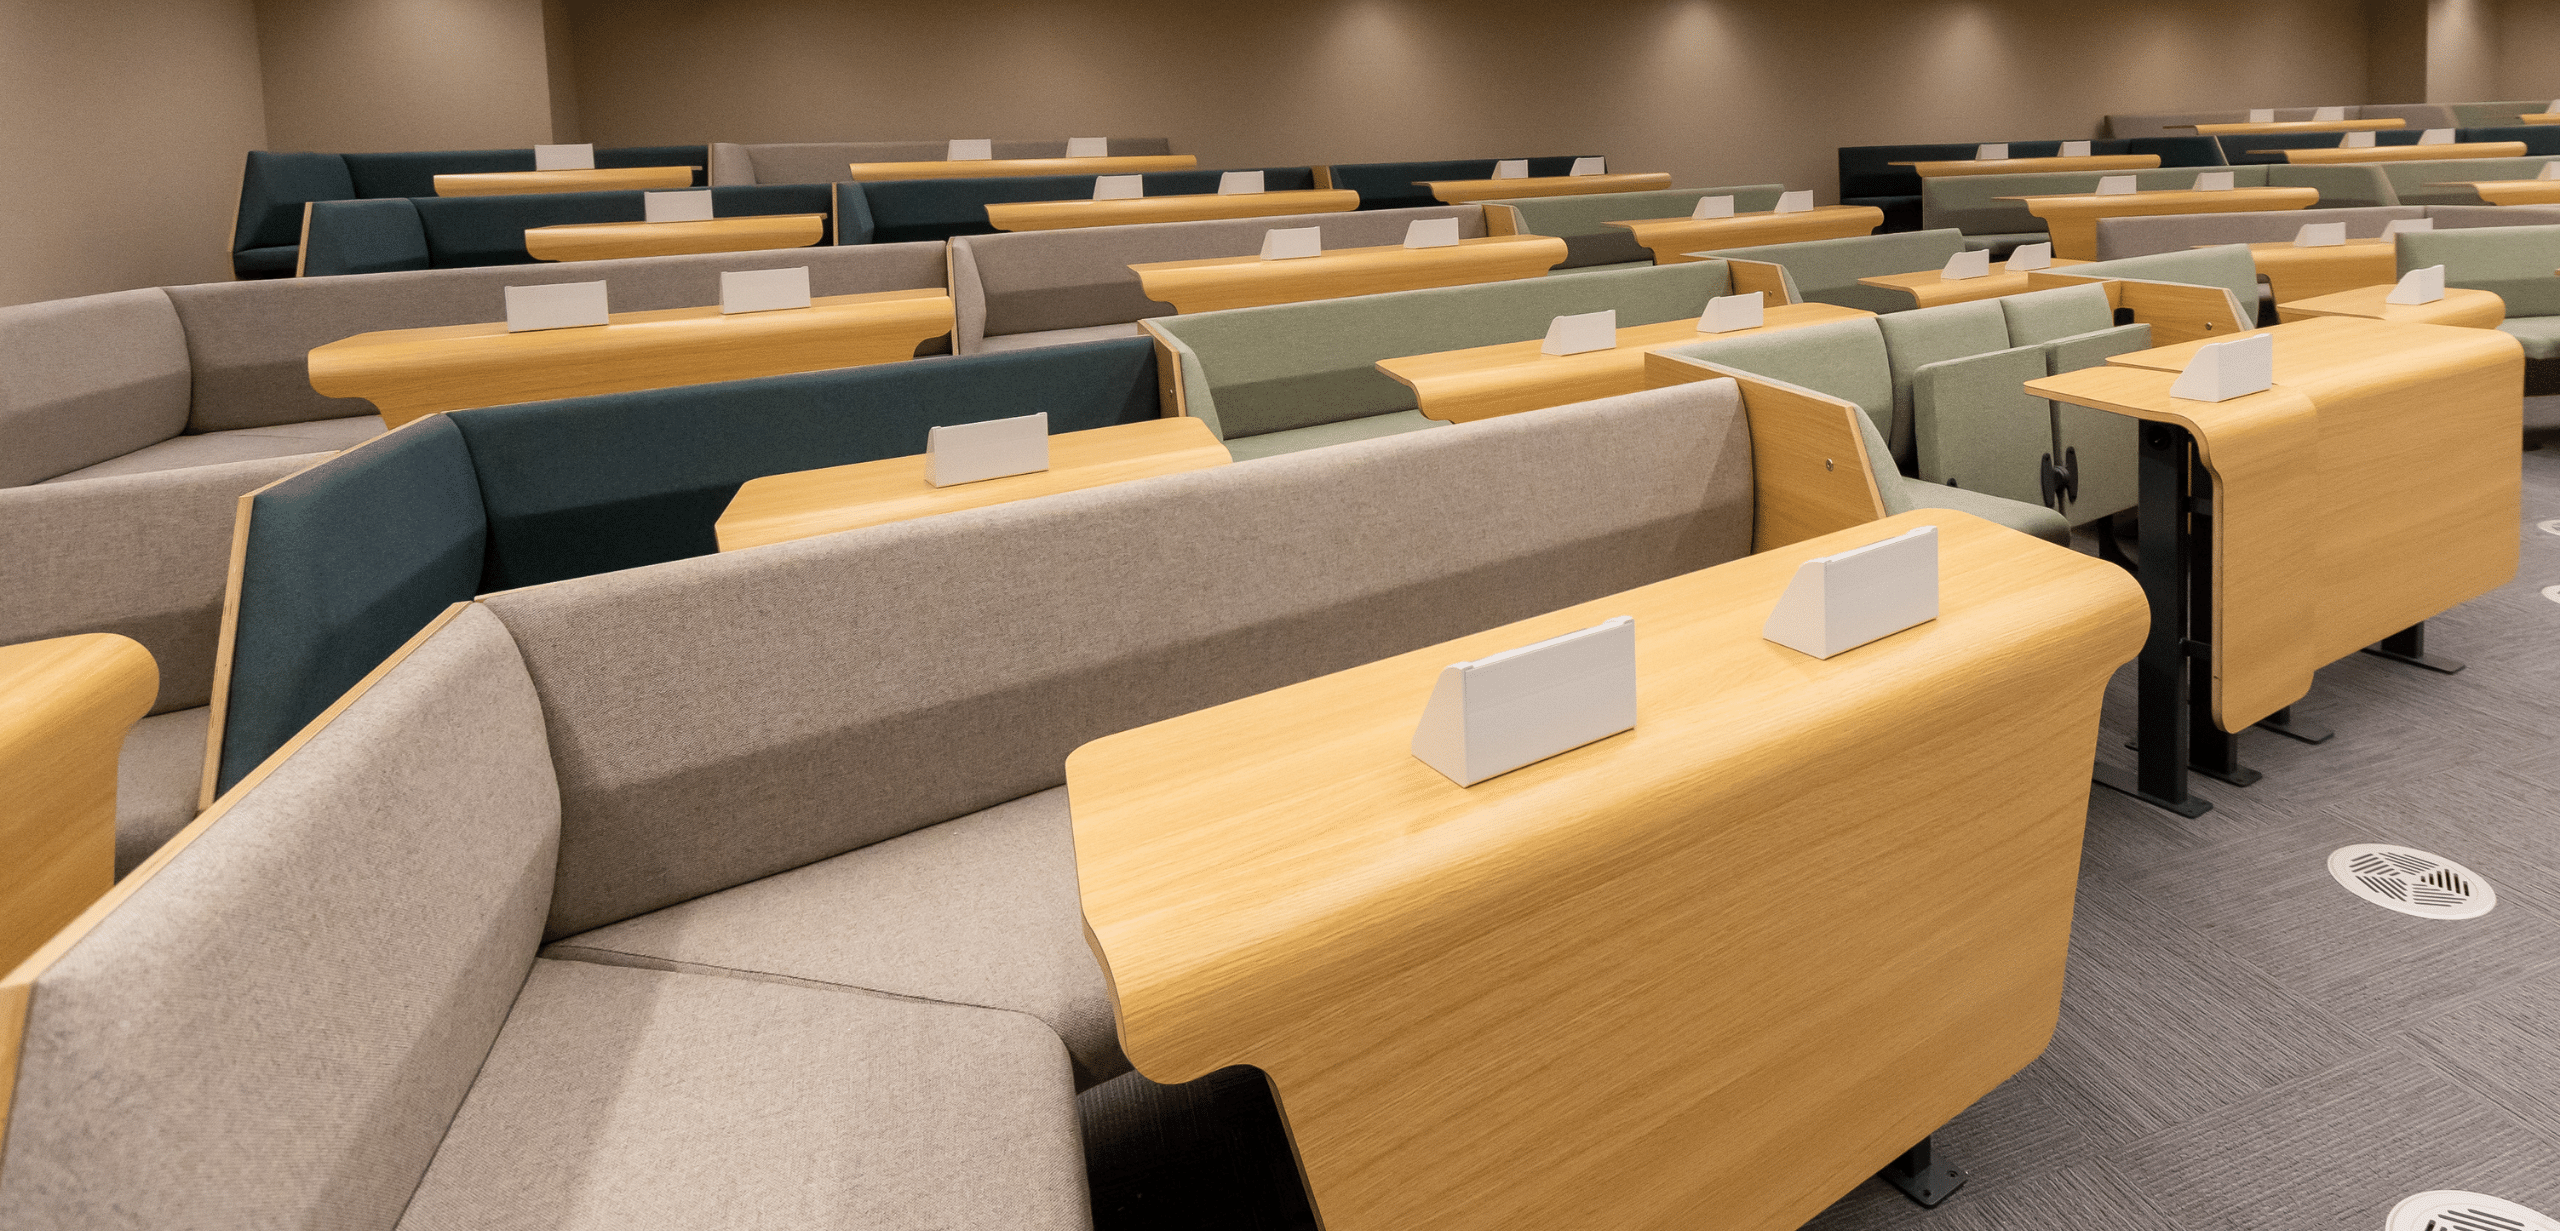 Connect collaborative bench seating by Race Furniture in the new Abacws Building at Cardiff University